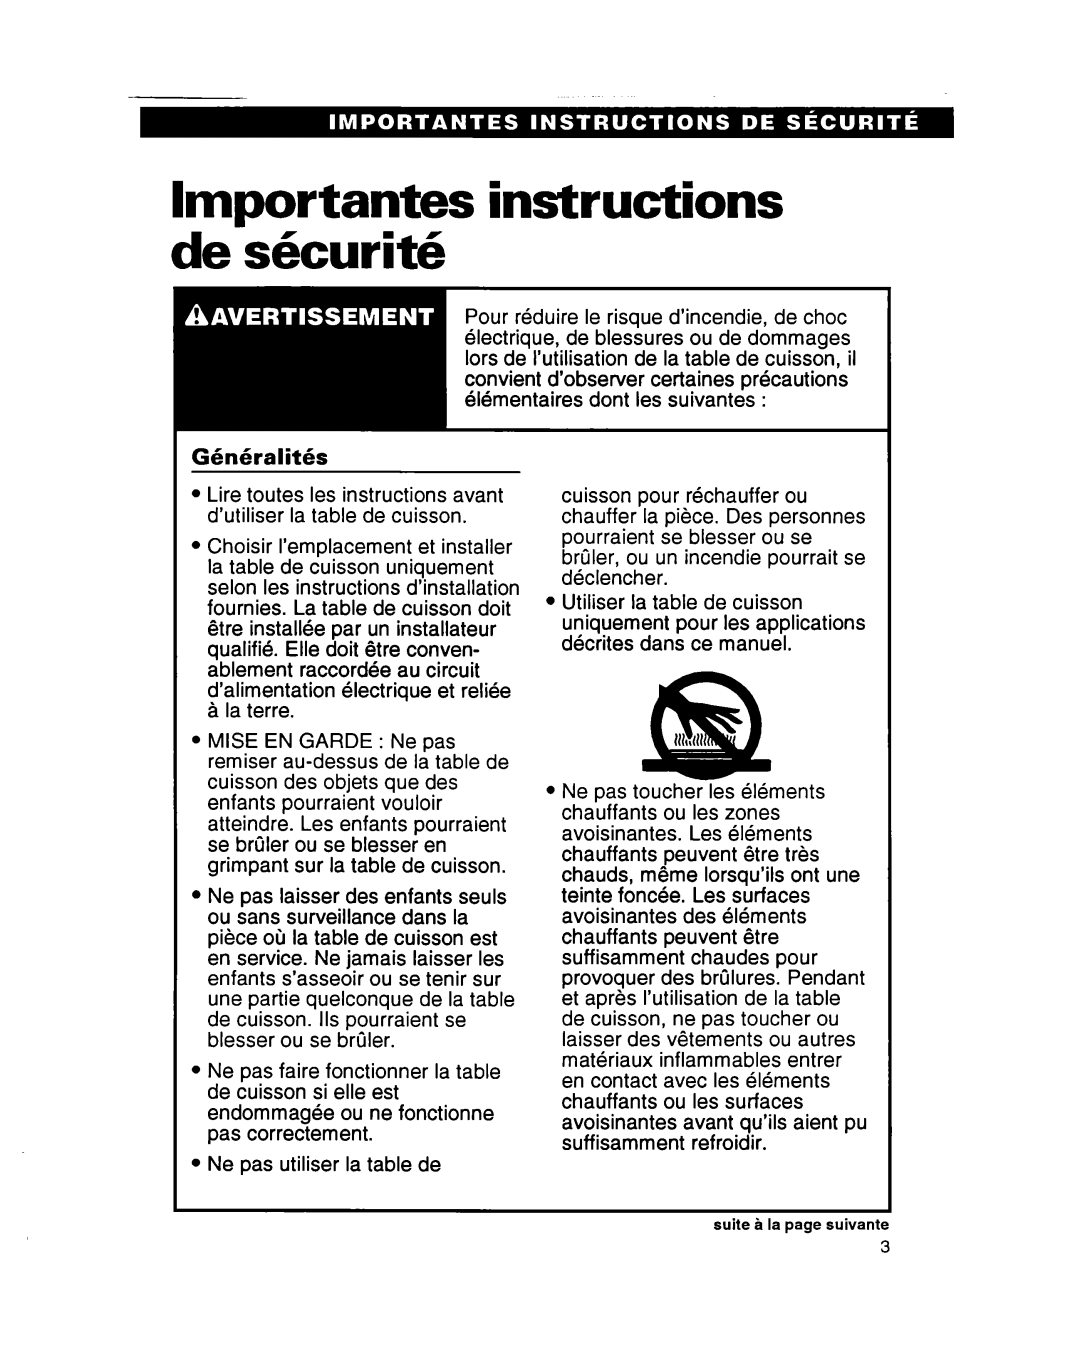 Whirlpool RC864OXB important safety instructions Importantes instructions de skurit6, Ght%alit&k 